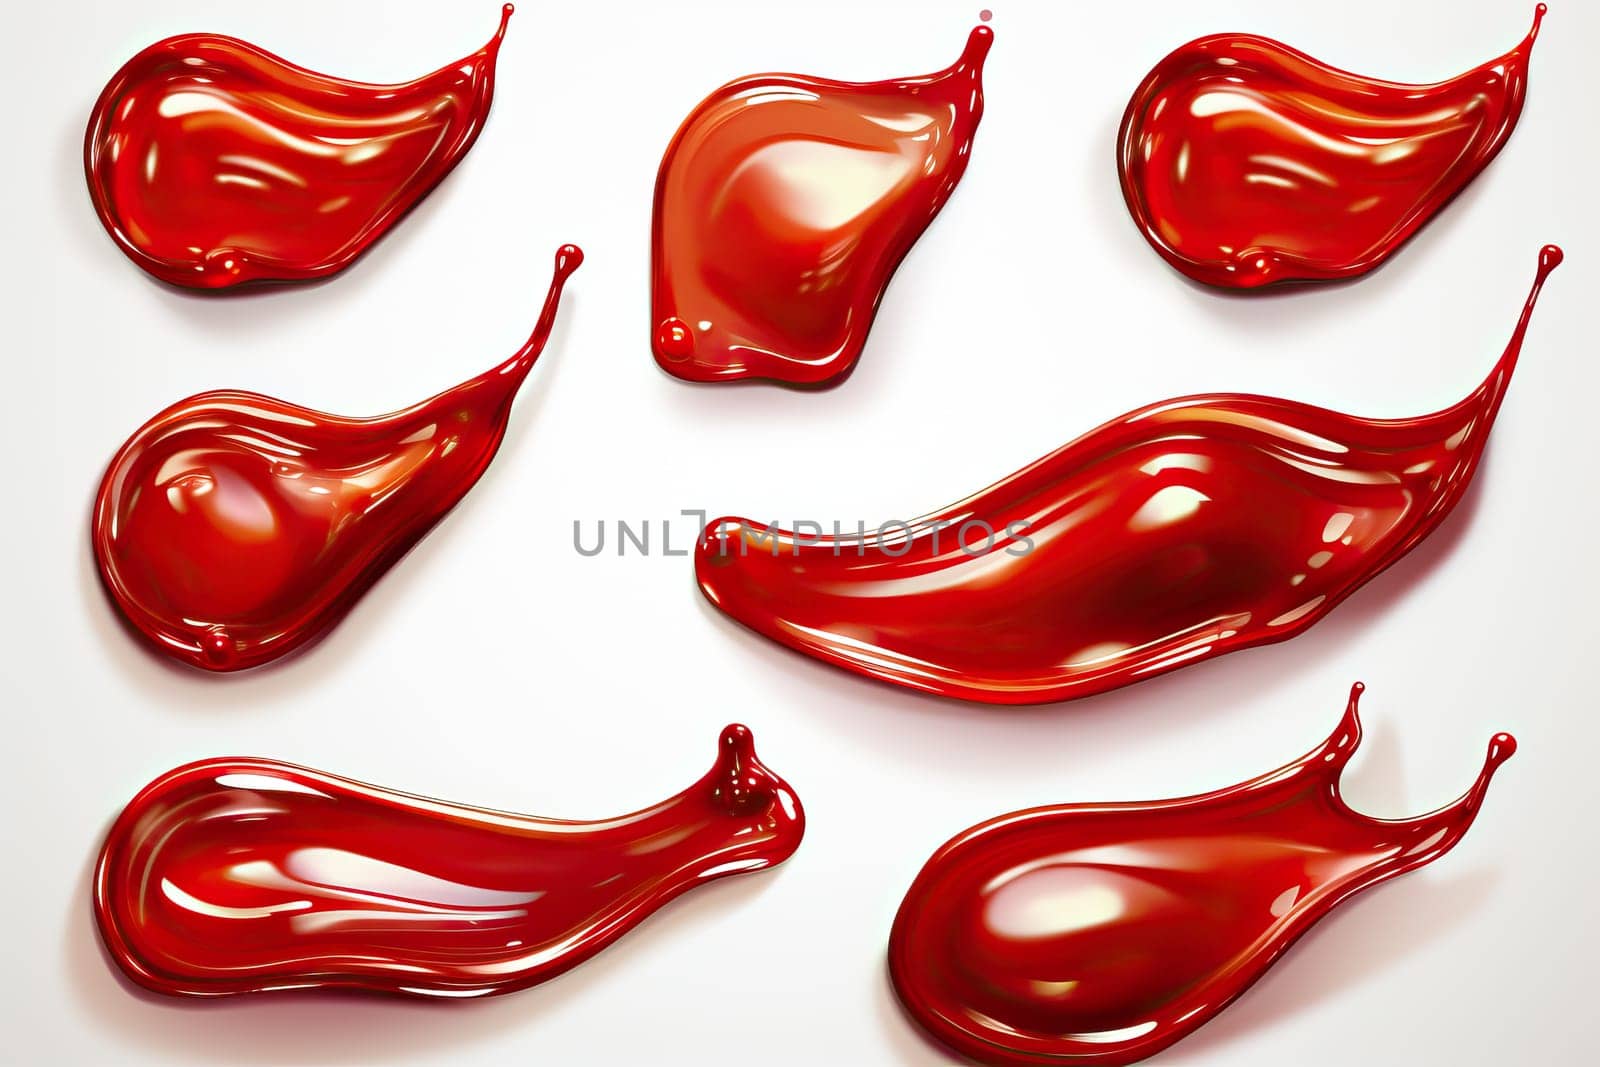 set of red drops and splashes of ketchup or sauce isolated on white background. by Niko_Cingaryuk